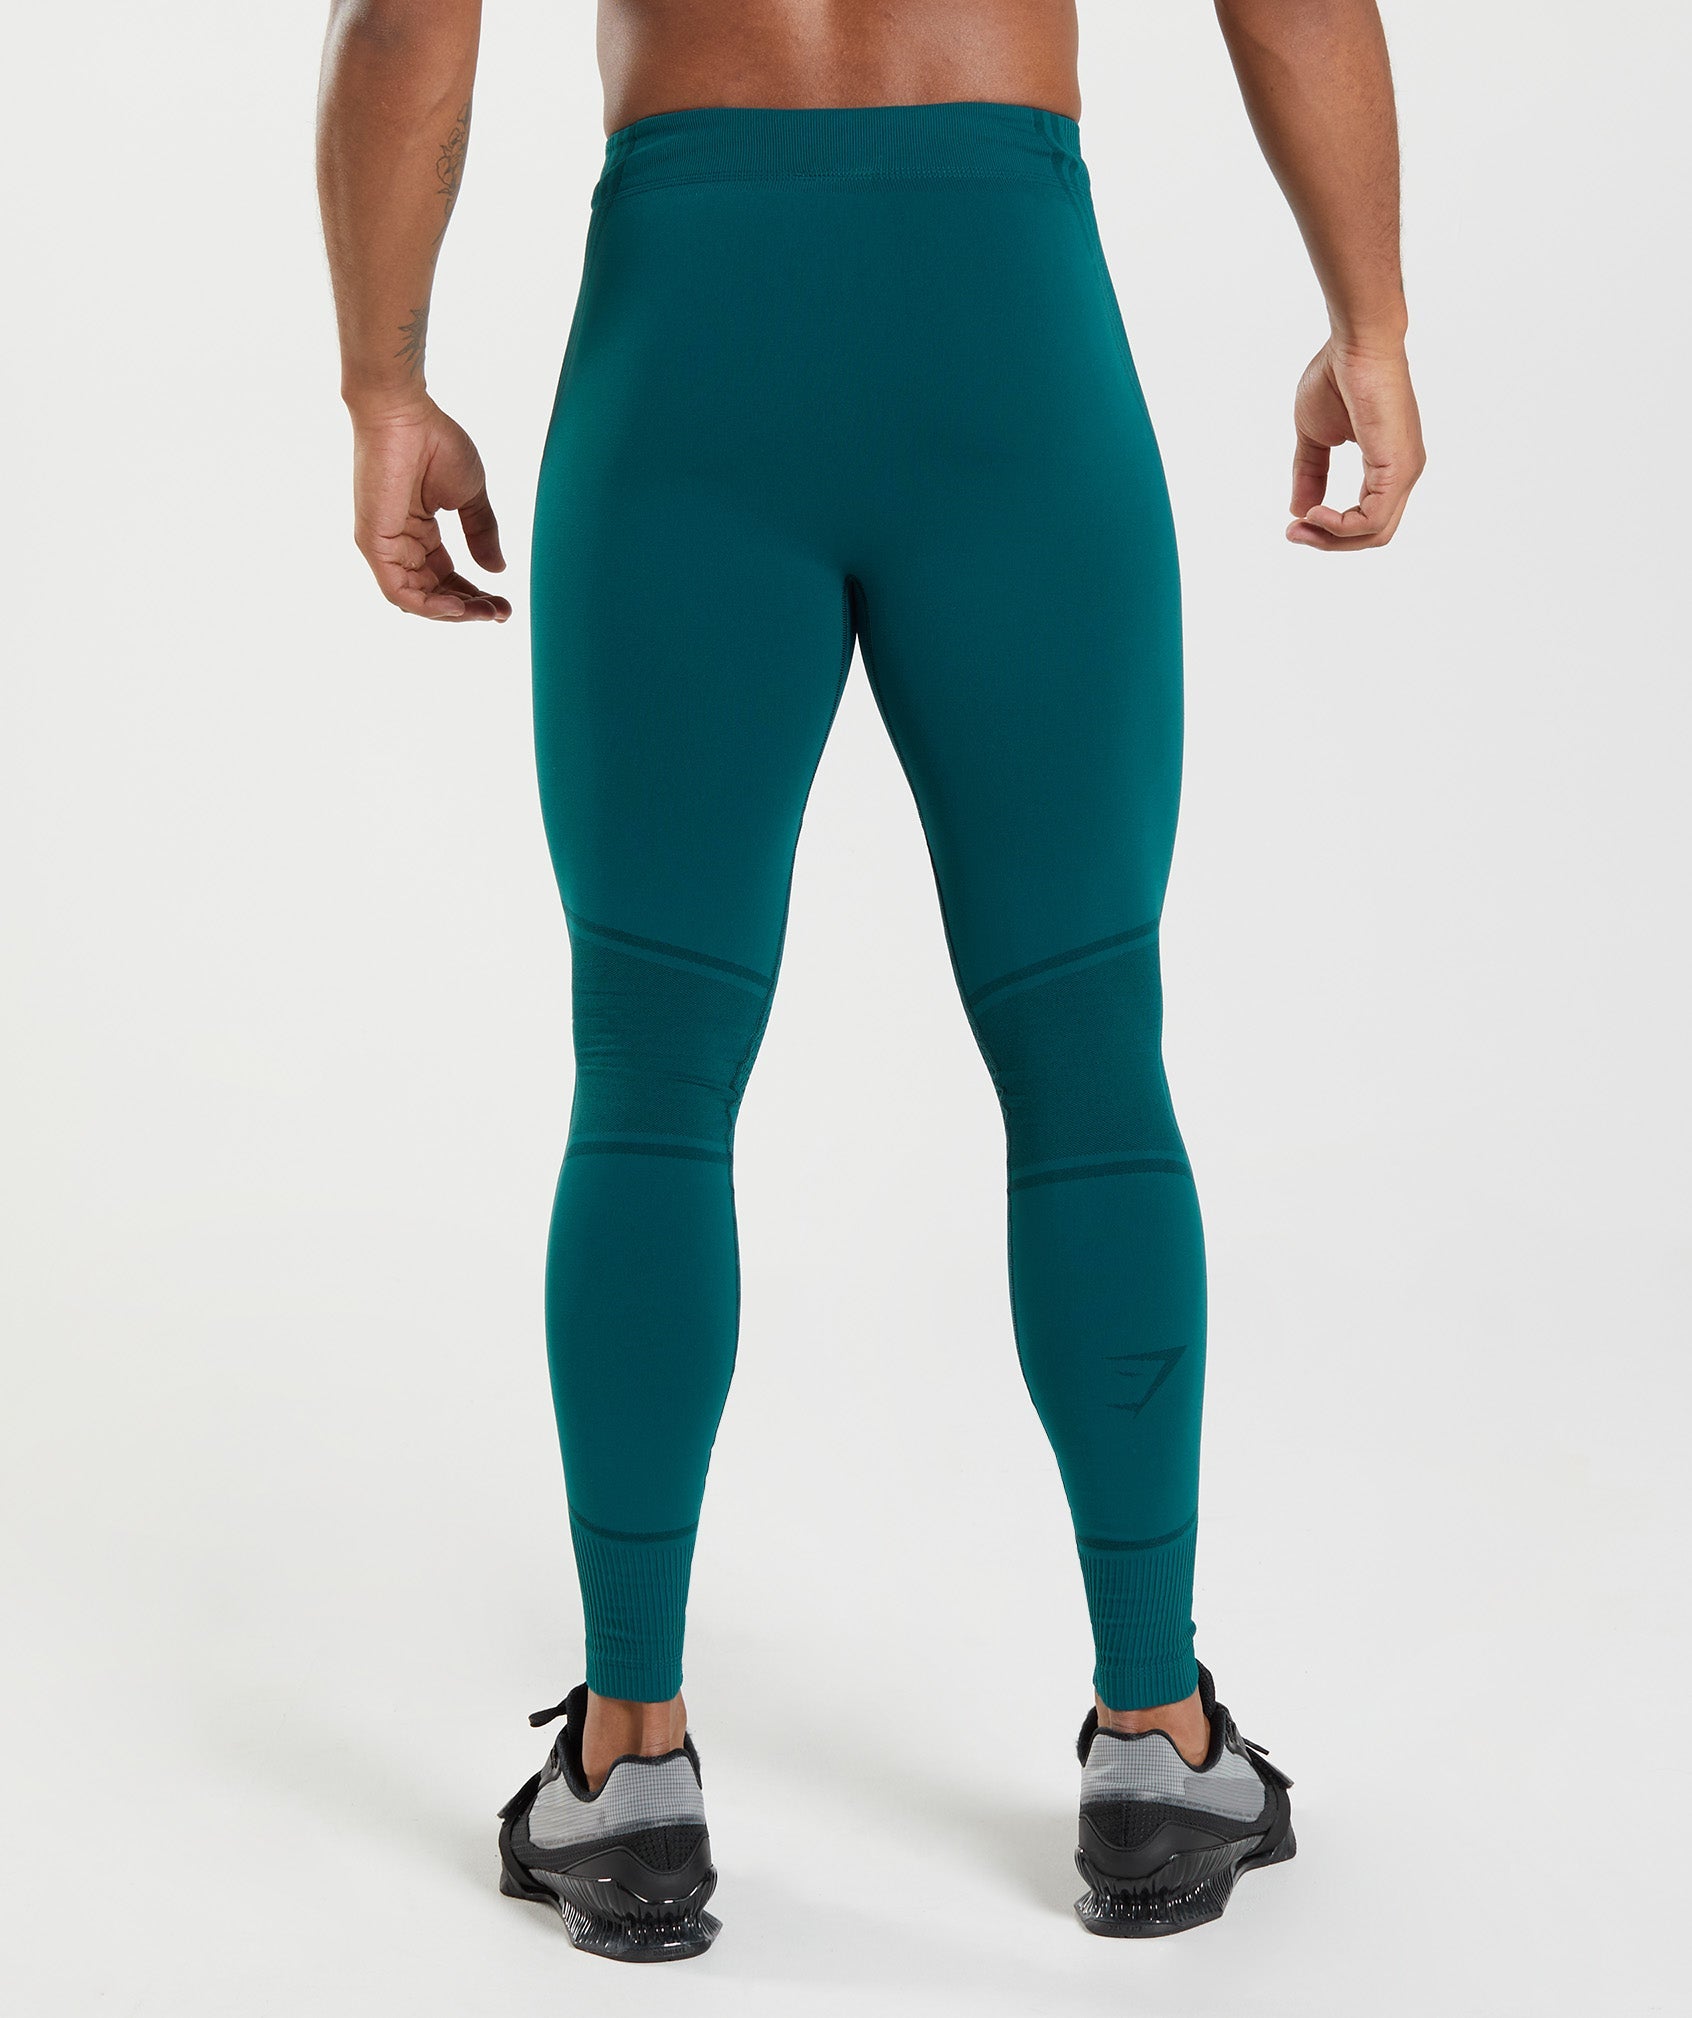 315 Seamless Tights in Winter Teal/Black - view 2